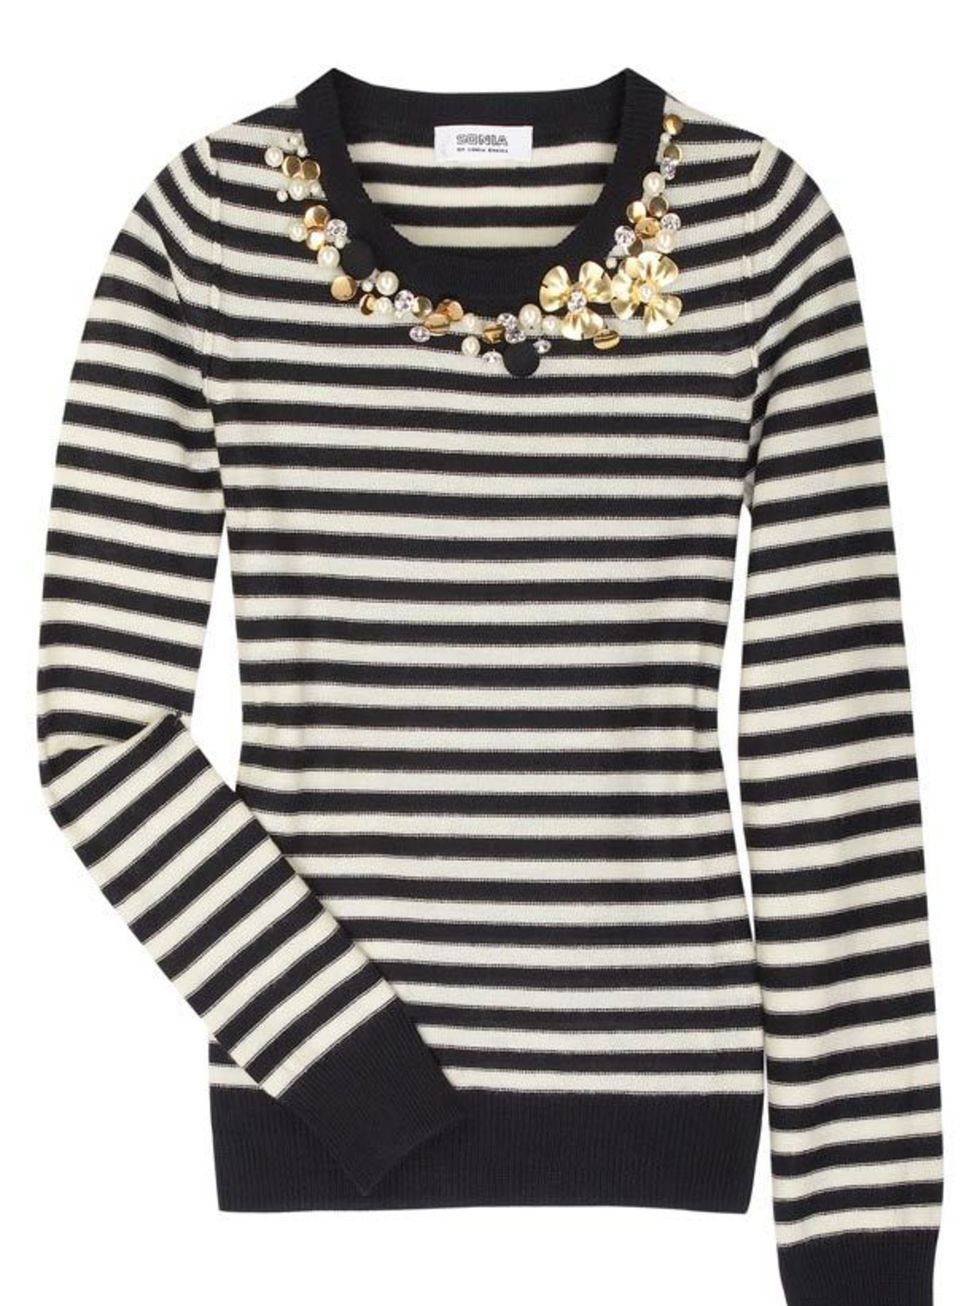 <p>Embellished striped jumper, £260, by Sonia by Sonia Rykiel at<a href="http://www.netaporter.com/product/46415">Net-a-Porter</a></p>